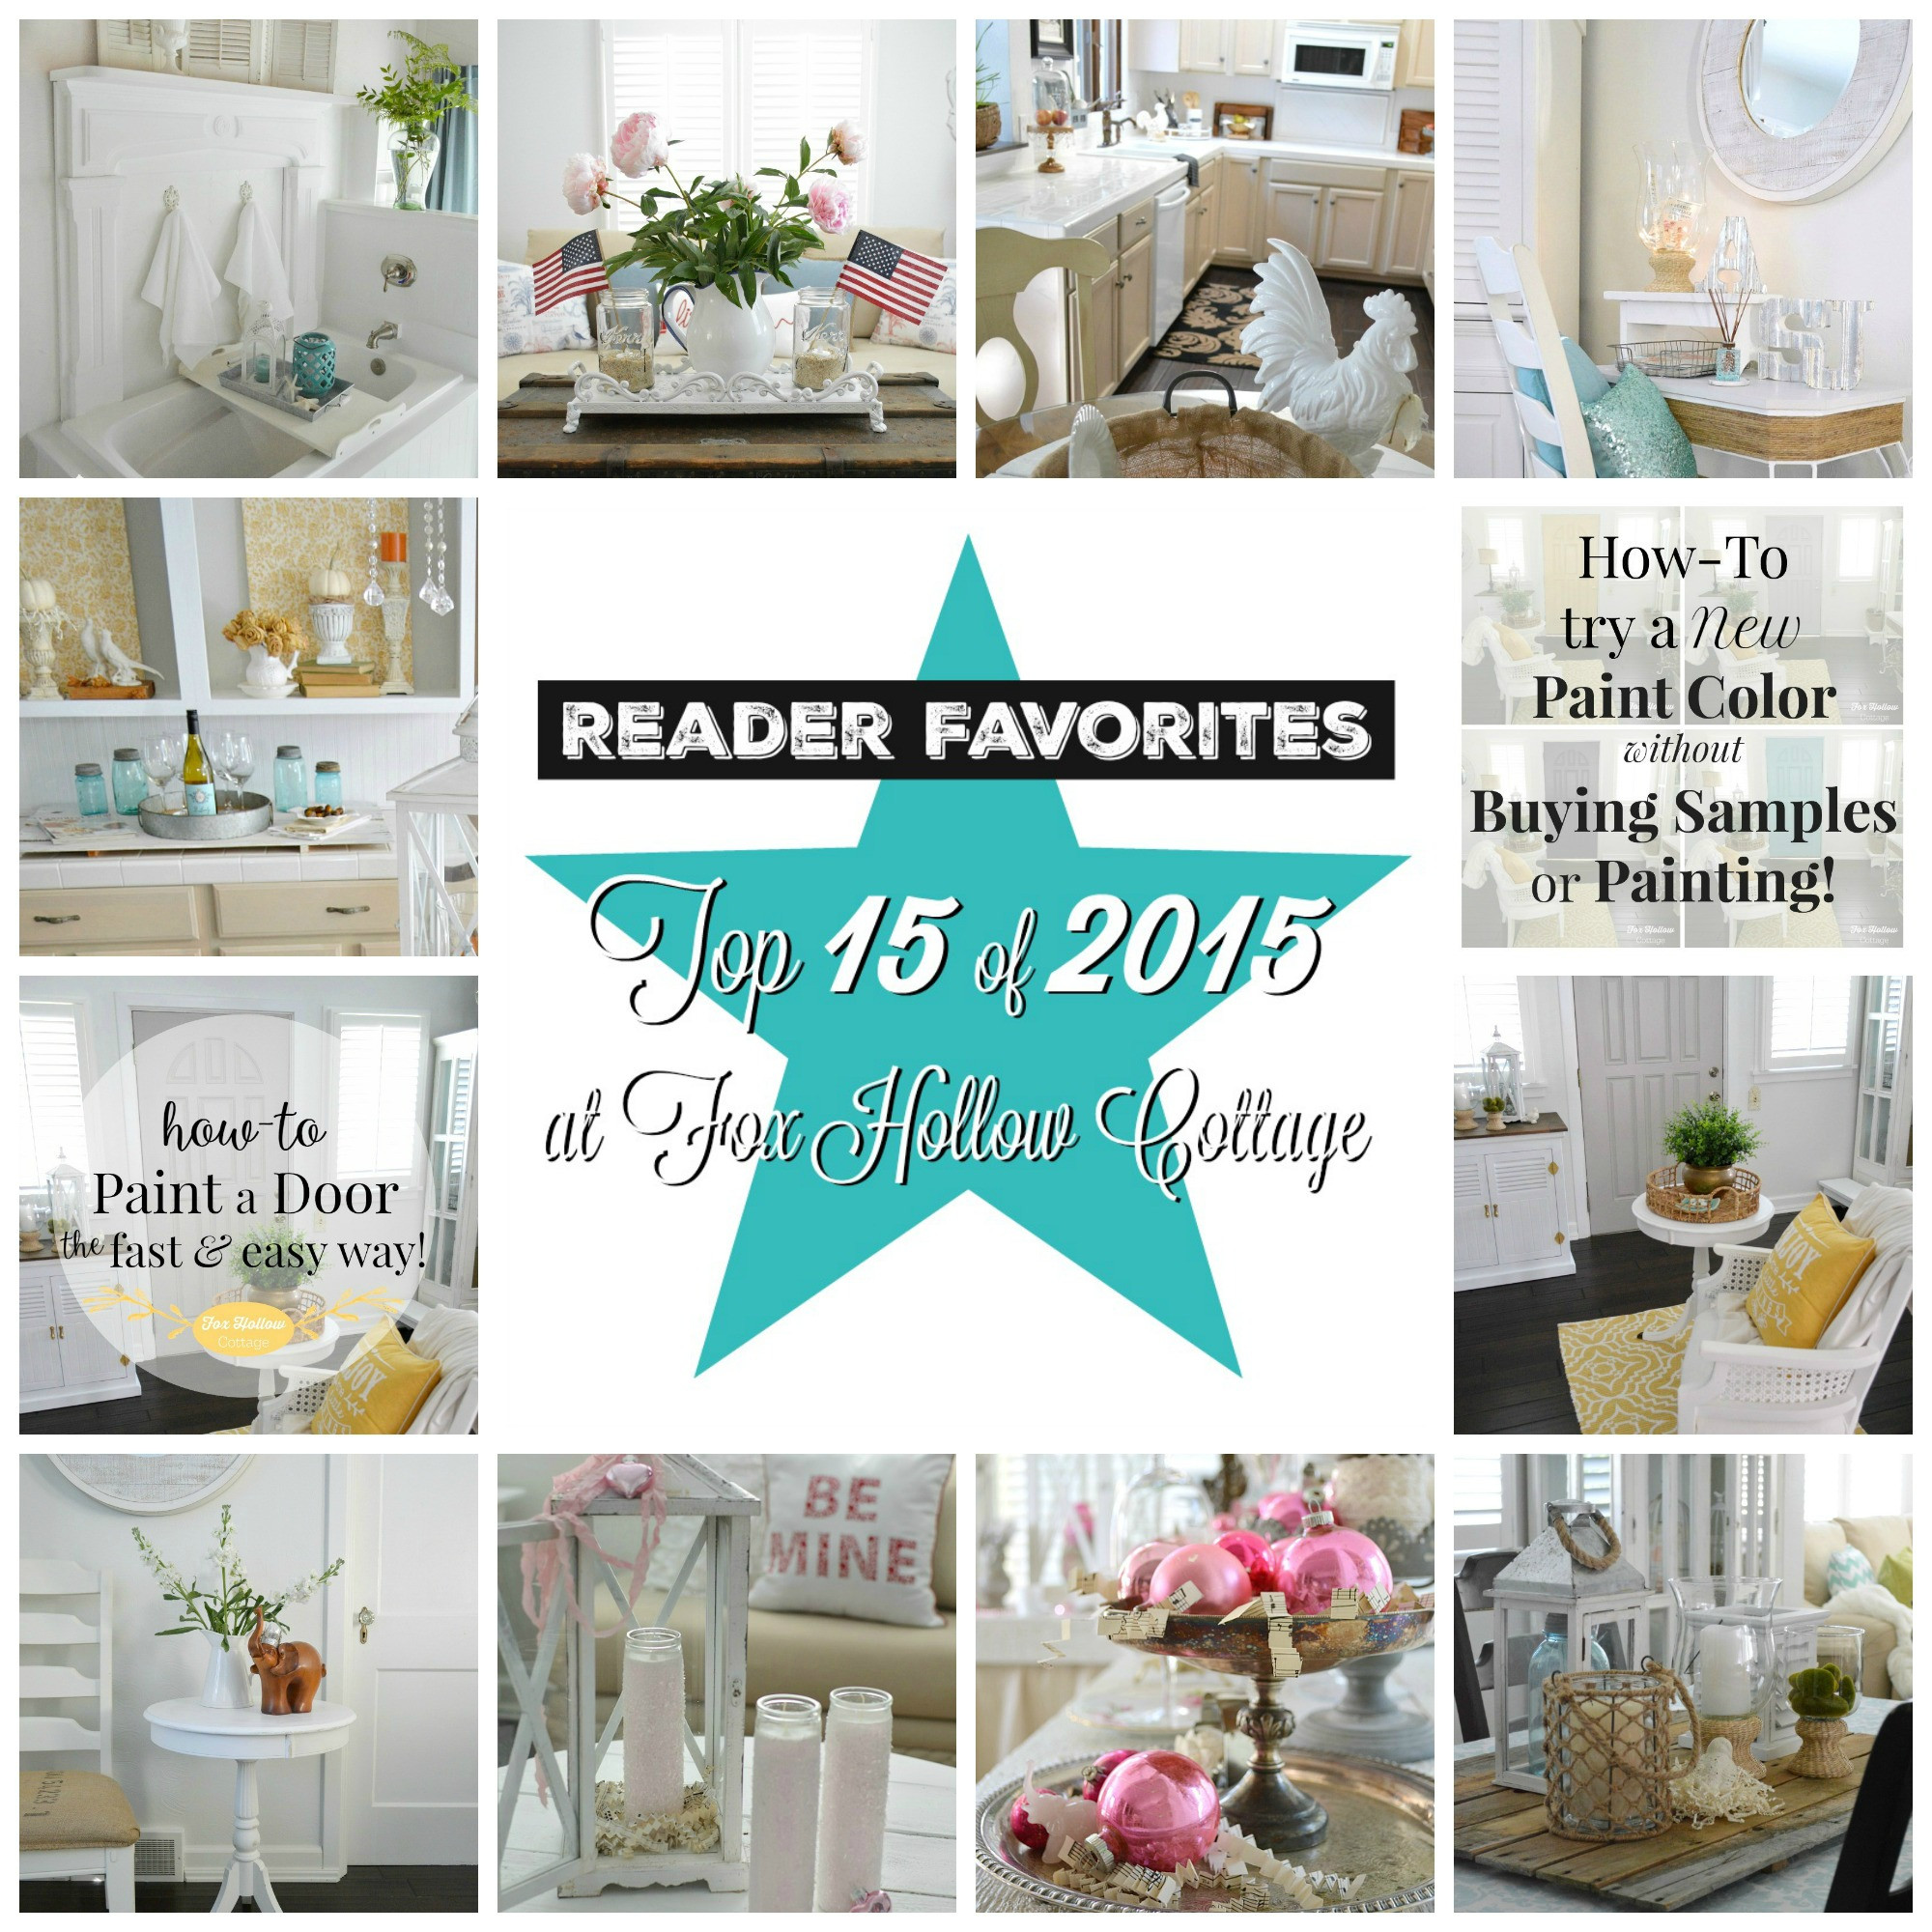 DIY Craft Home Decor
 Top 15 DIY Craft and Home Decorating Projects of 2015